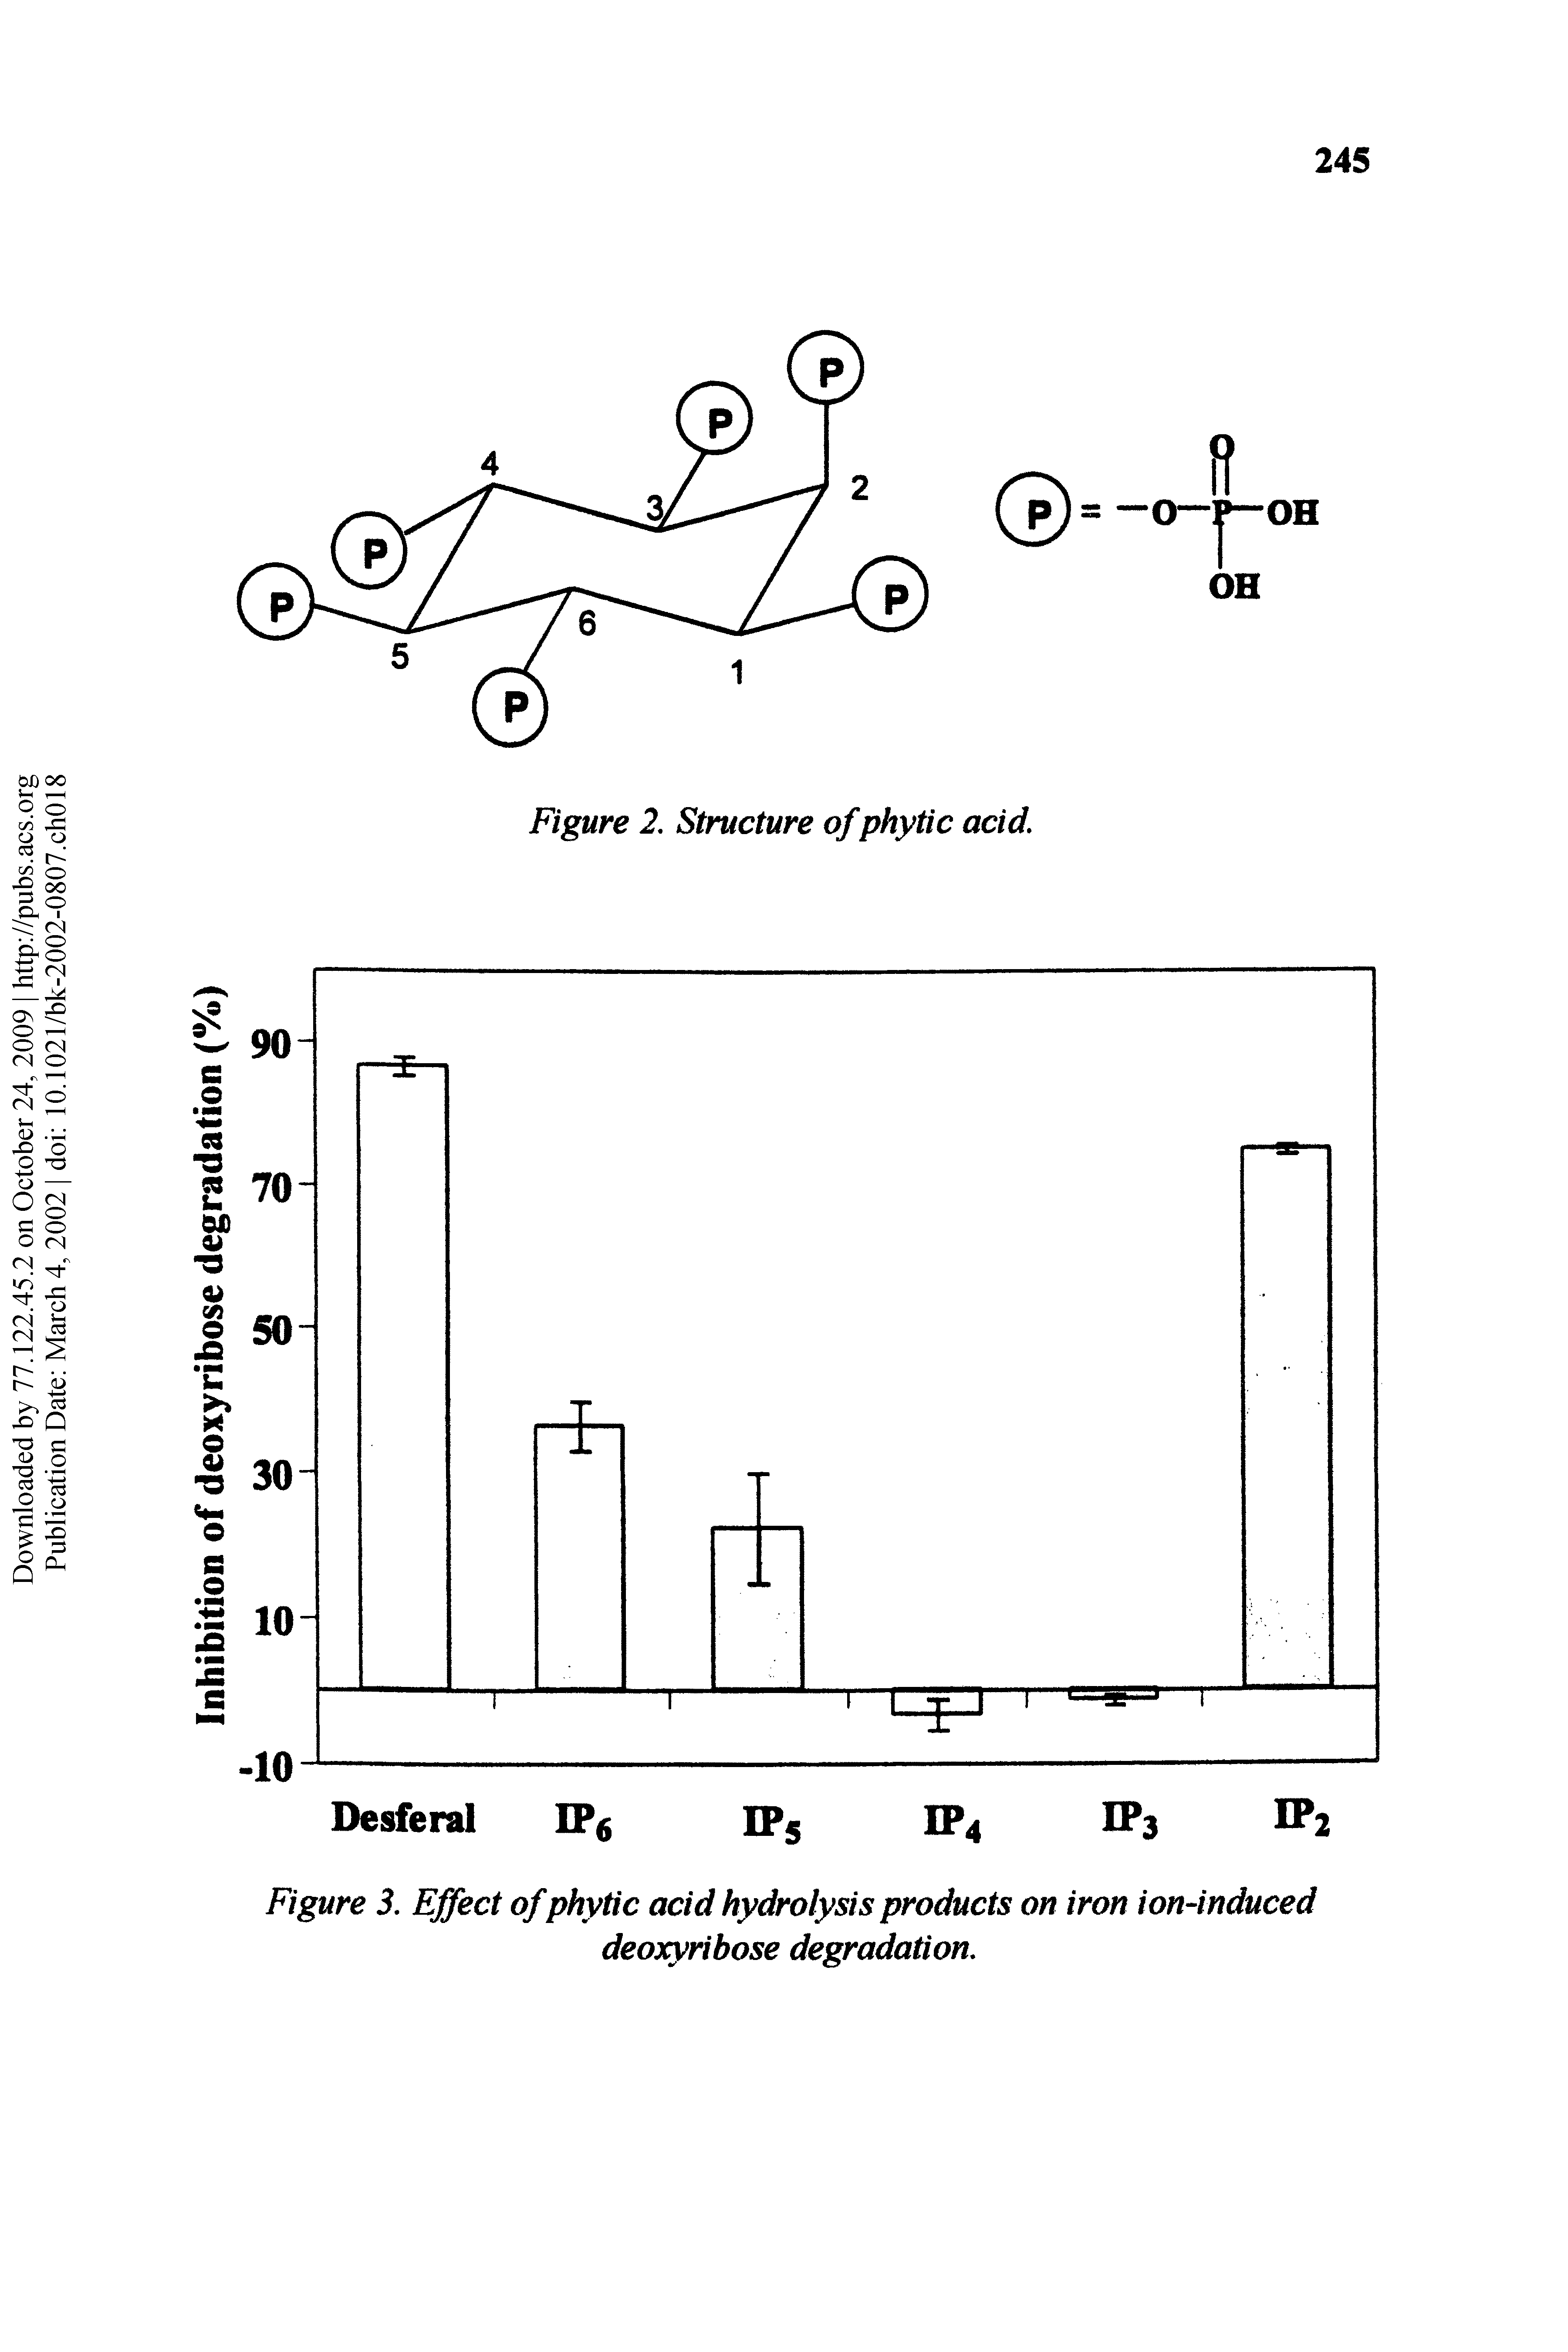 Figure 3. Effect of phytic acid hydrolysis products on iron ion4nduced deoxyribose degradation.